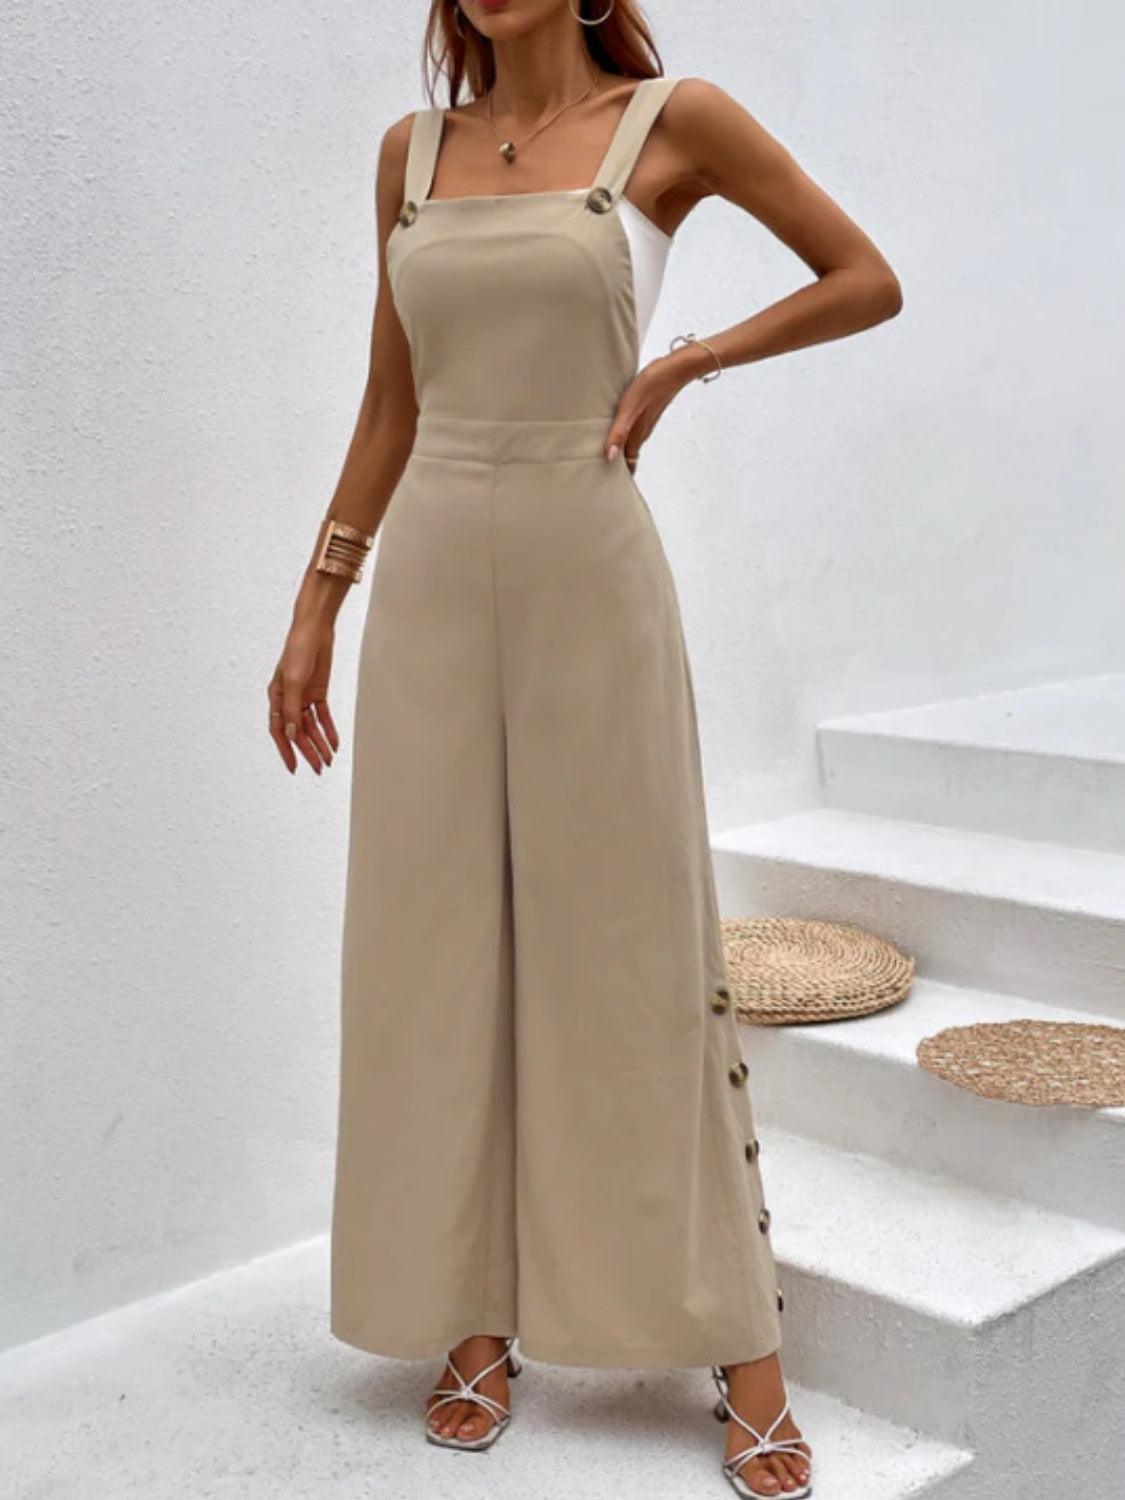 a woman wearing a tan jumpsuit and sandals